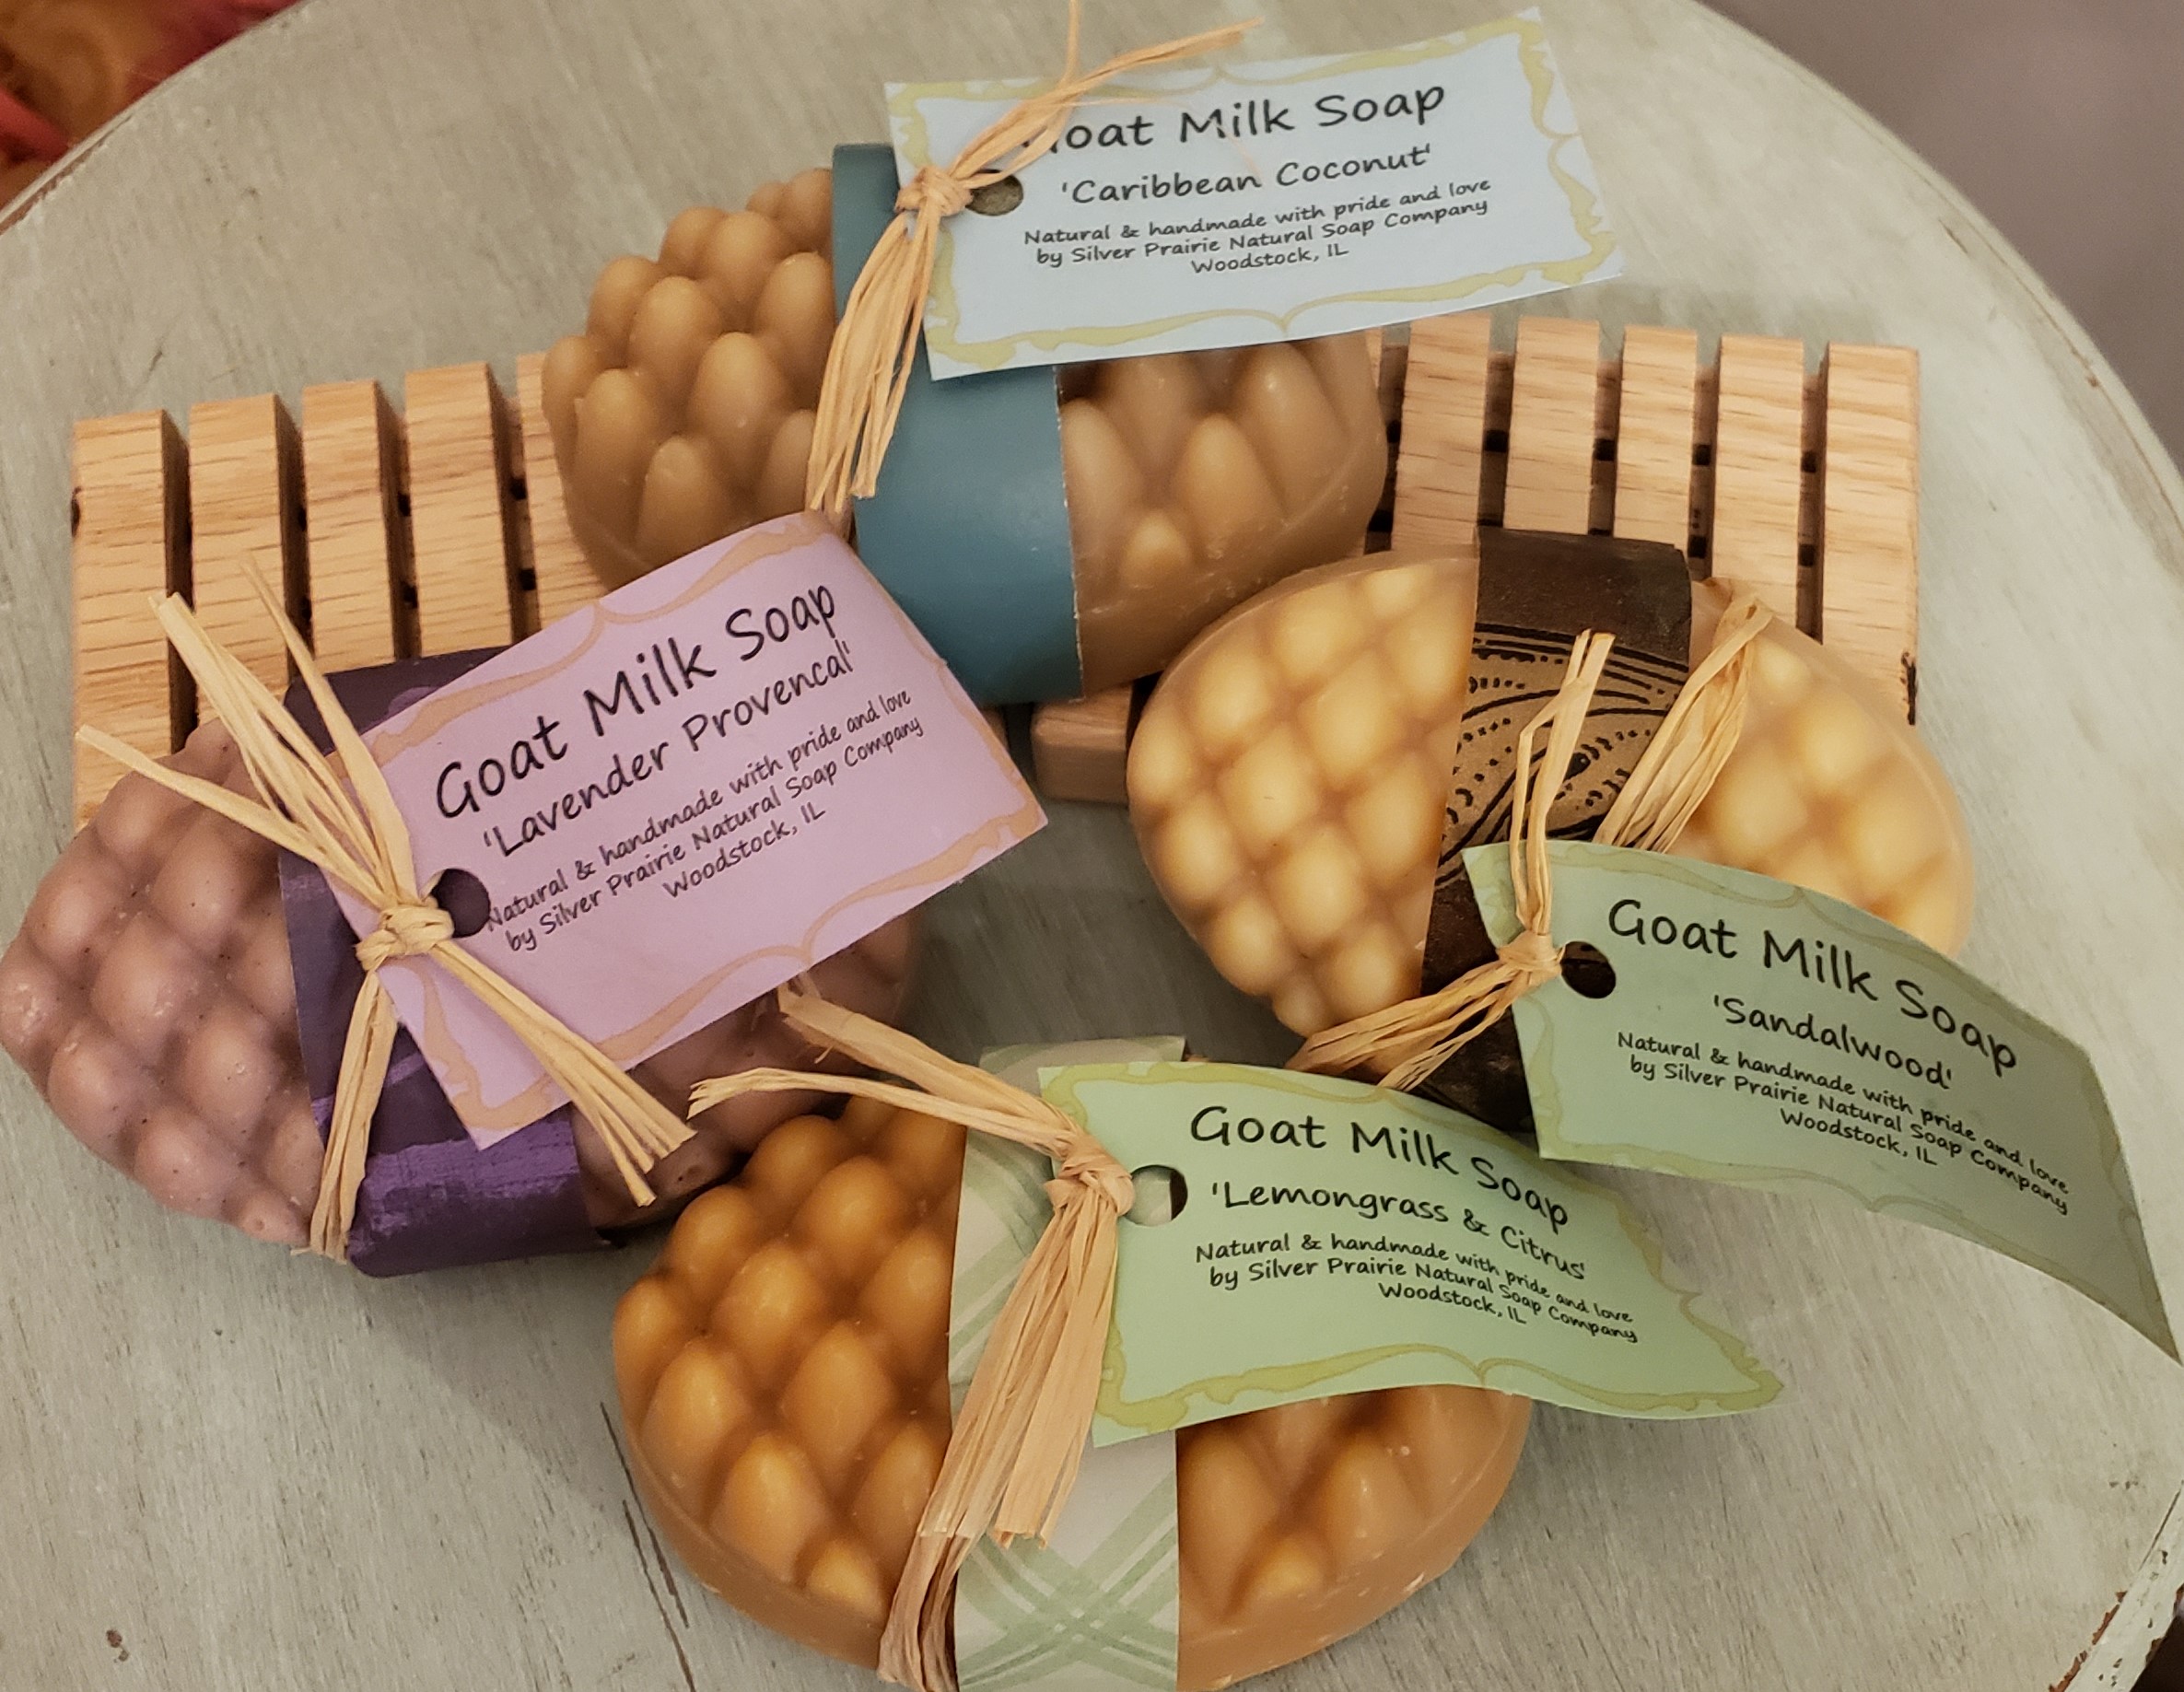 Massage Bars With Loofa - Silver Prairie Natural Soap - Woodstock, IL